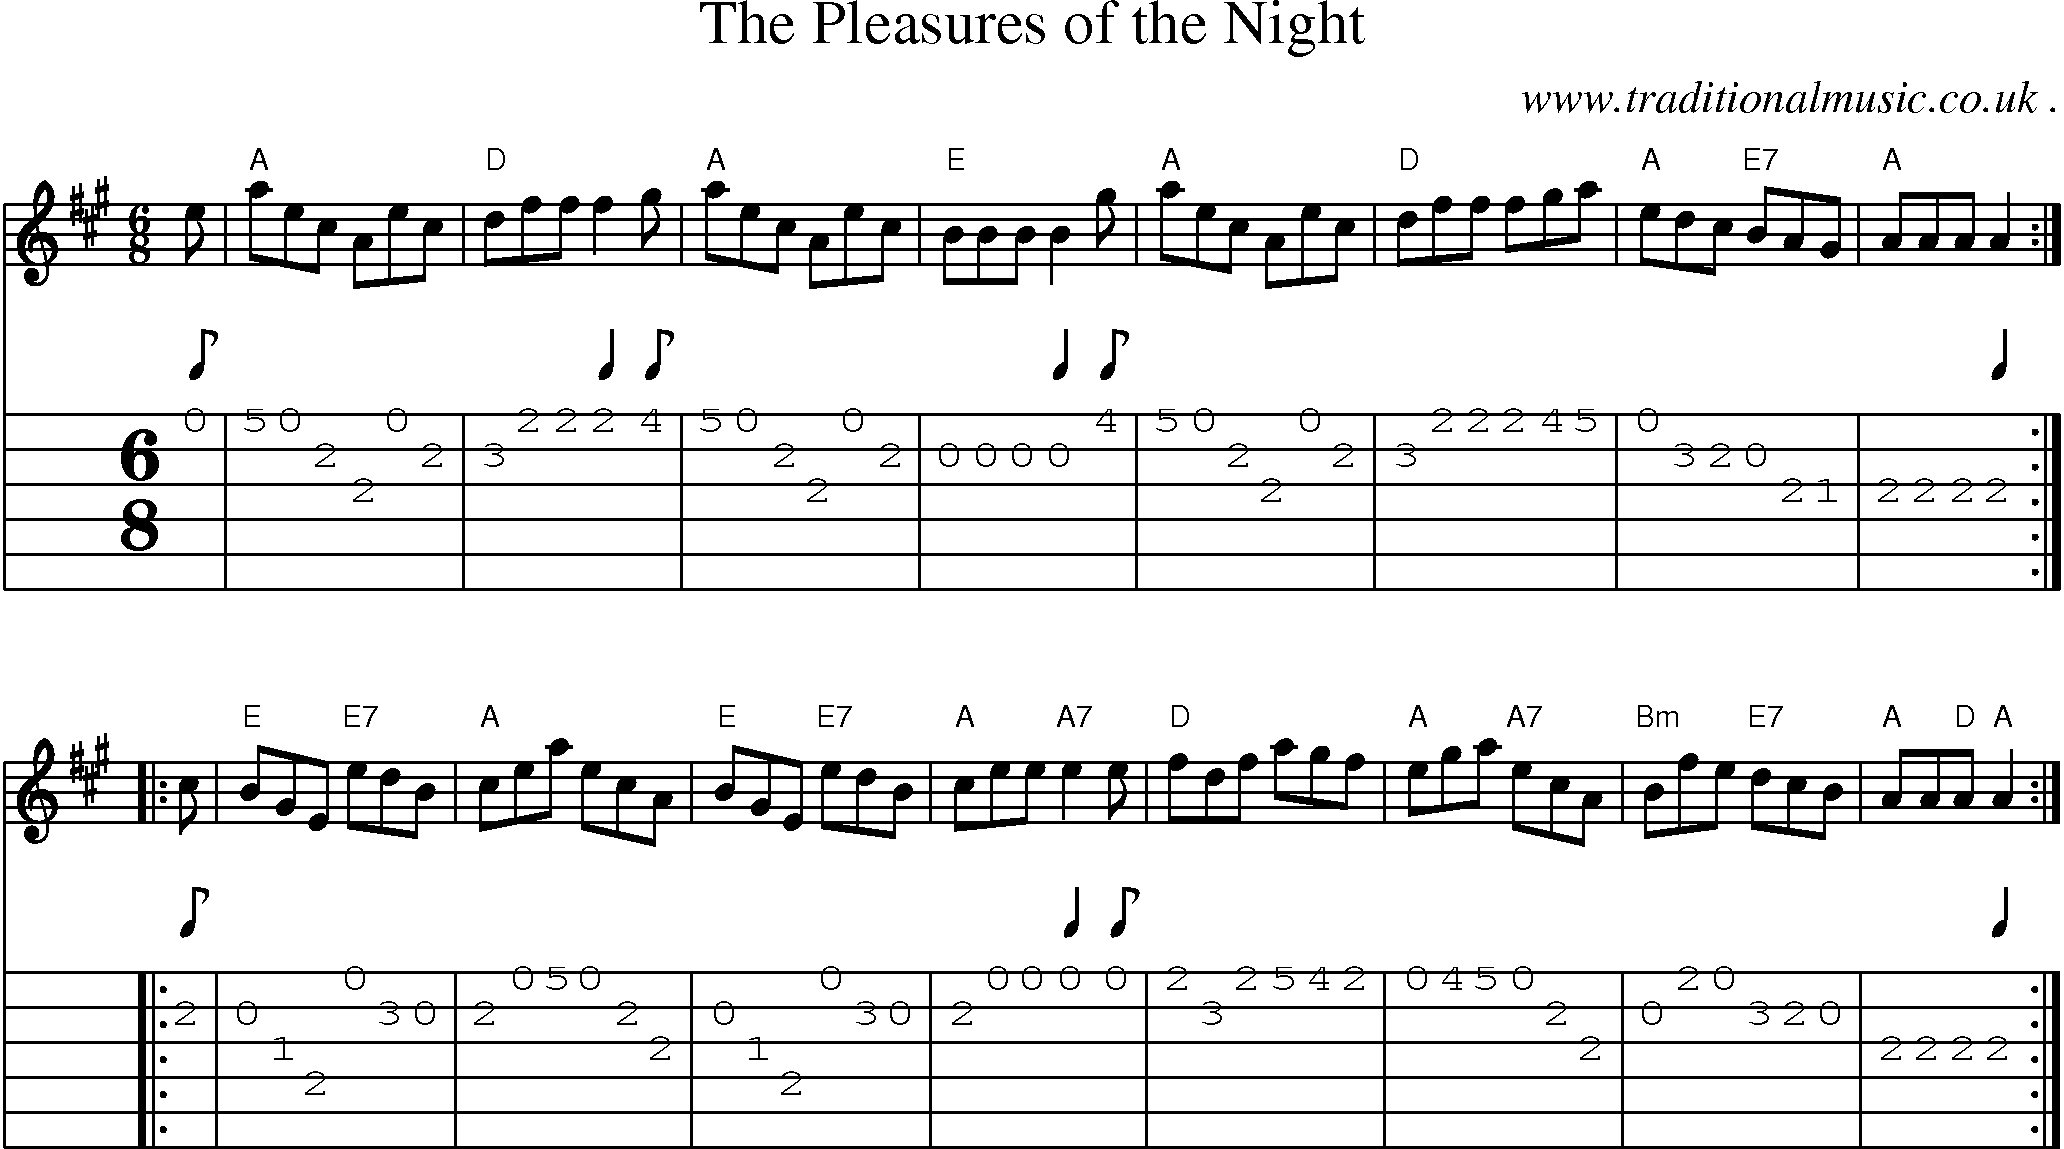 Sheet-music  score, Chords and Guitar Tabs for The Pleasures Of The Night